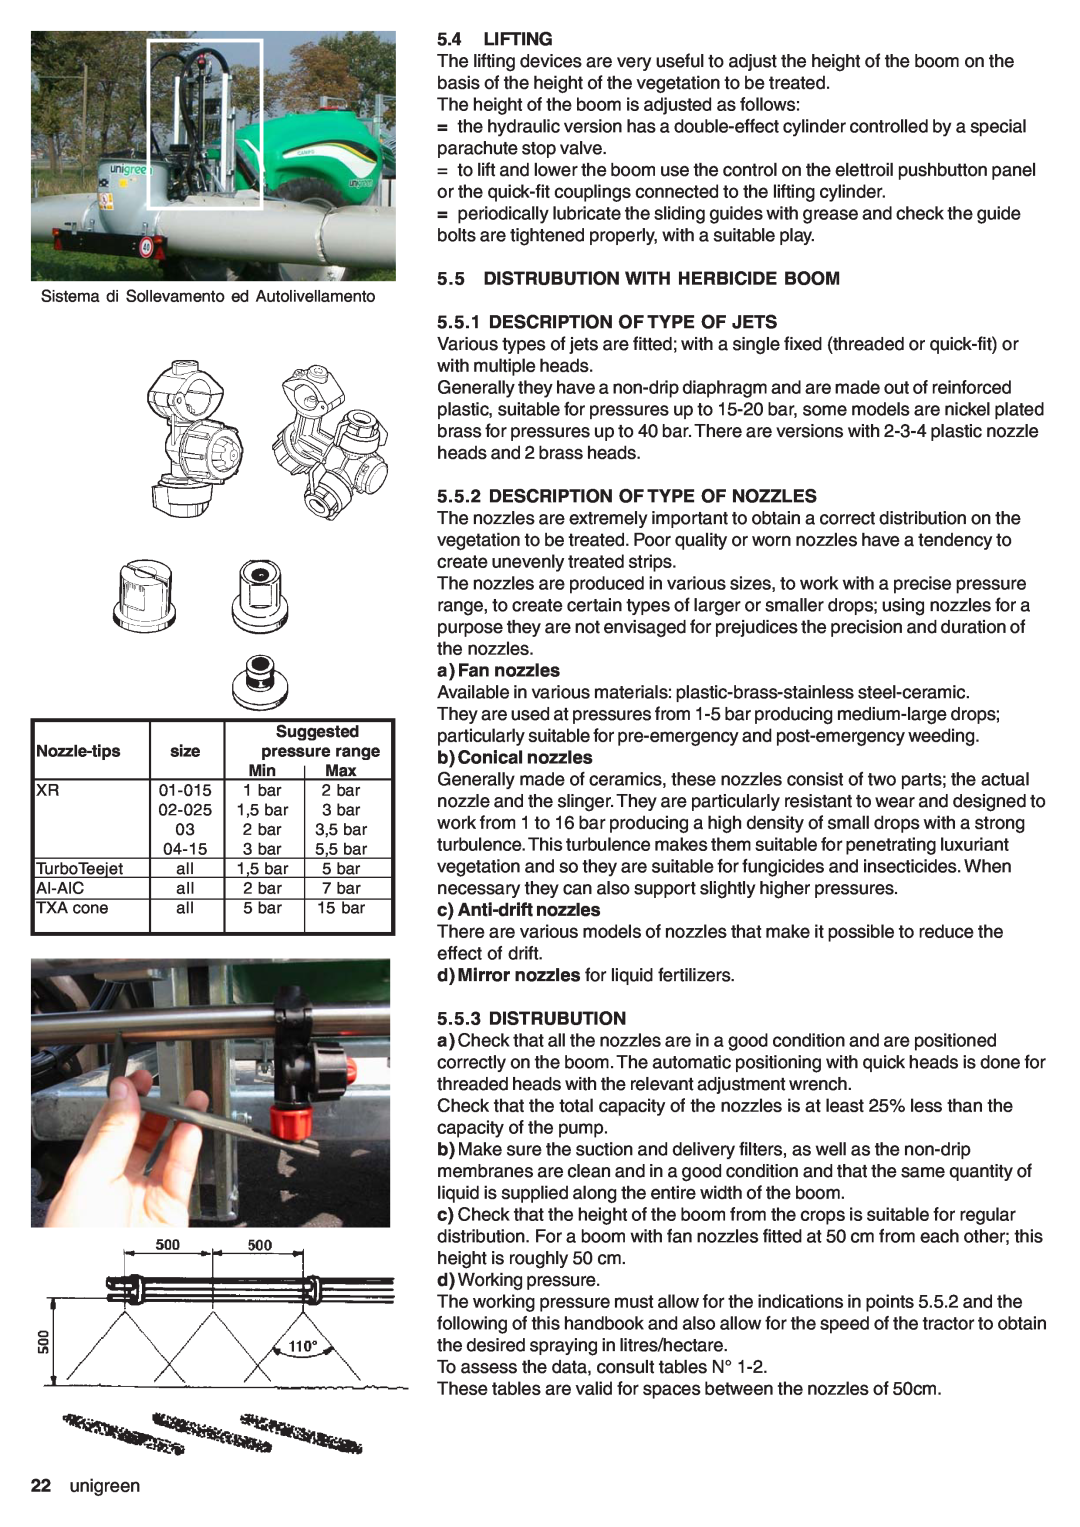 Unigreen DSP 11 - 16 - 22 - 32 manual Lifting, Distrubution With Herbicide Boom, Description Of Type Of Jets, a Fan nozzles 